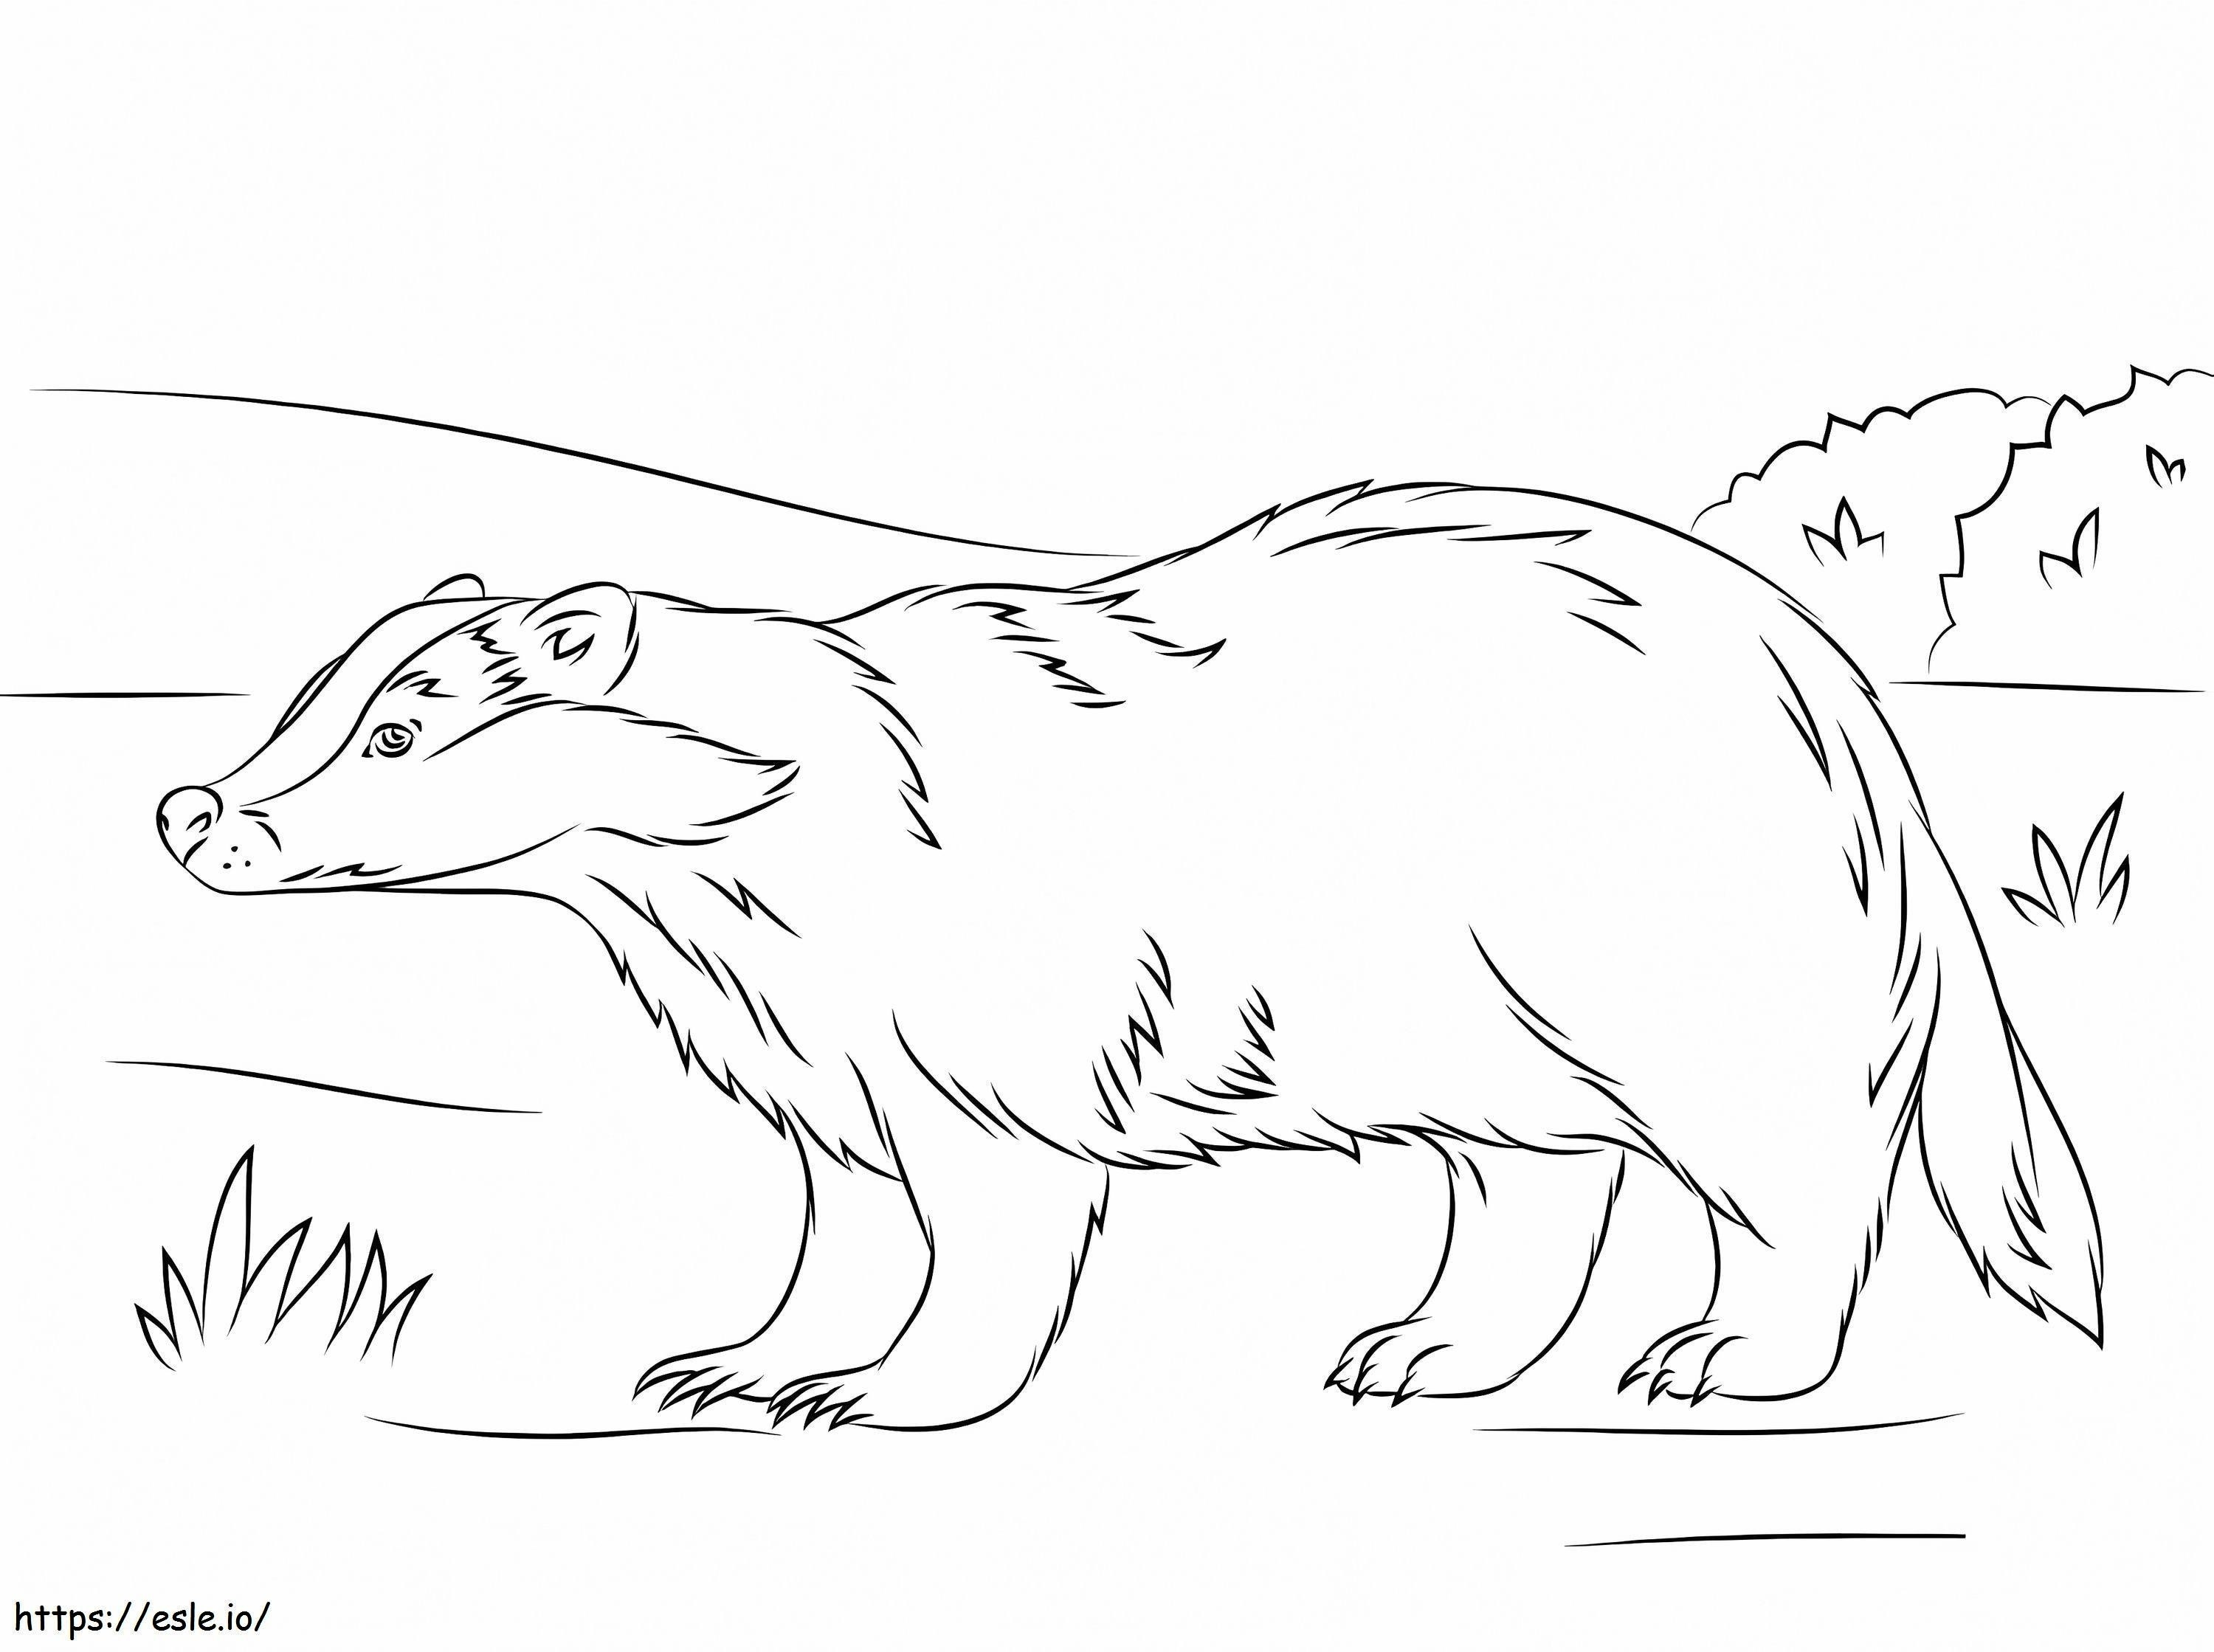 European Badger coloring page